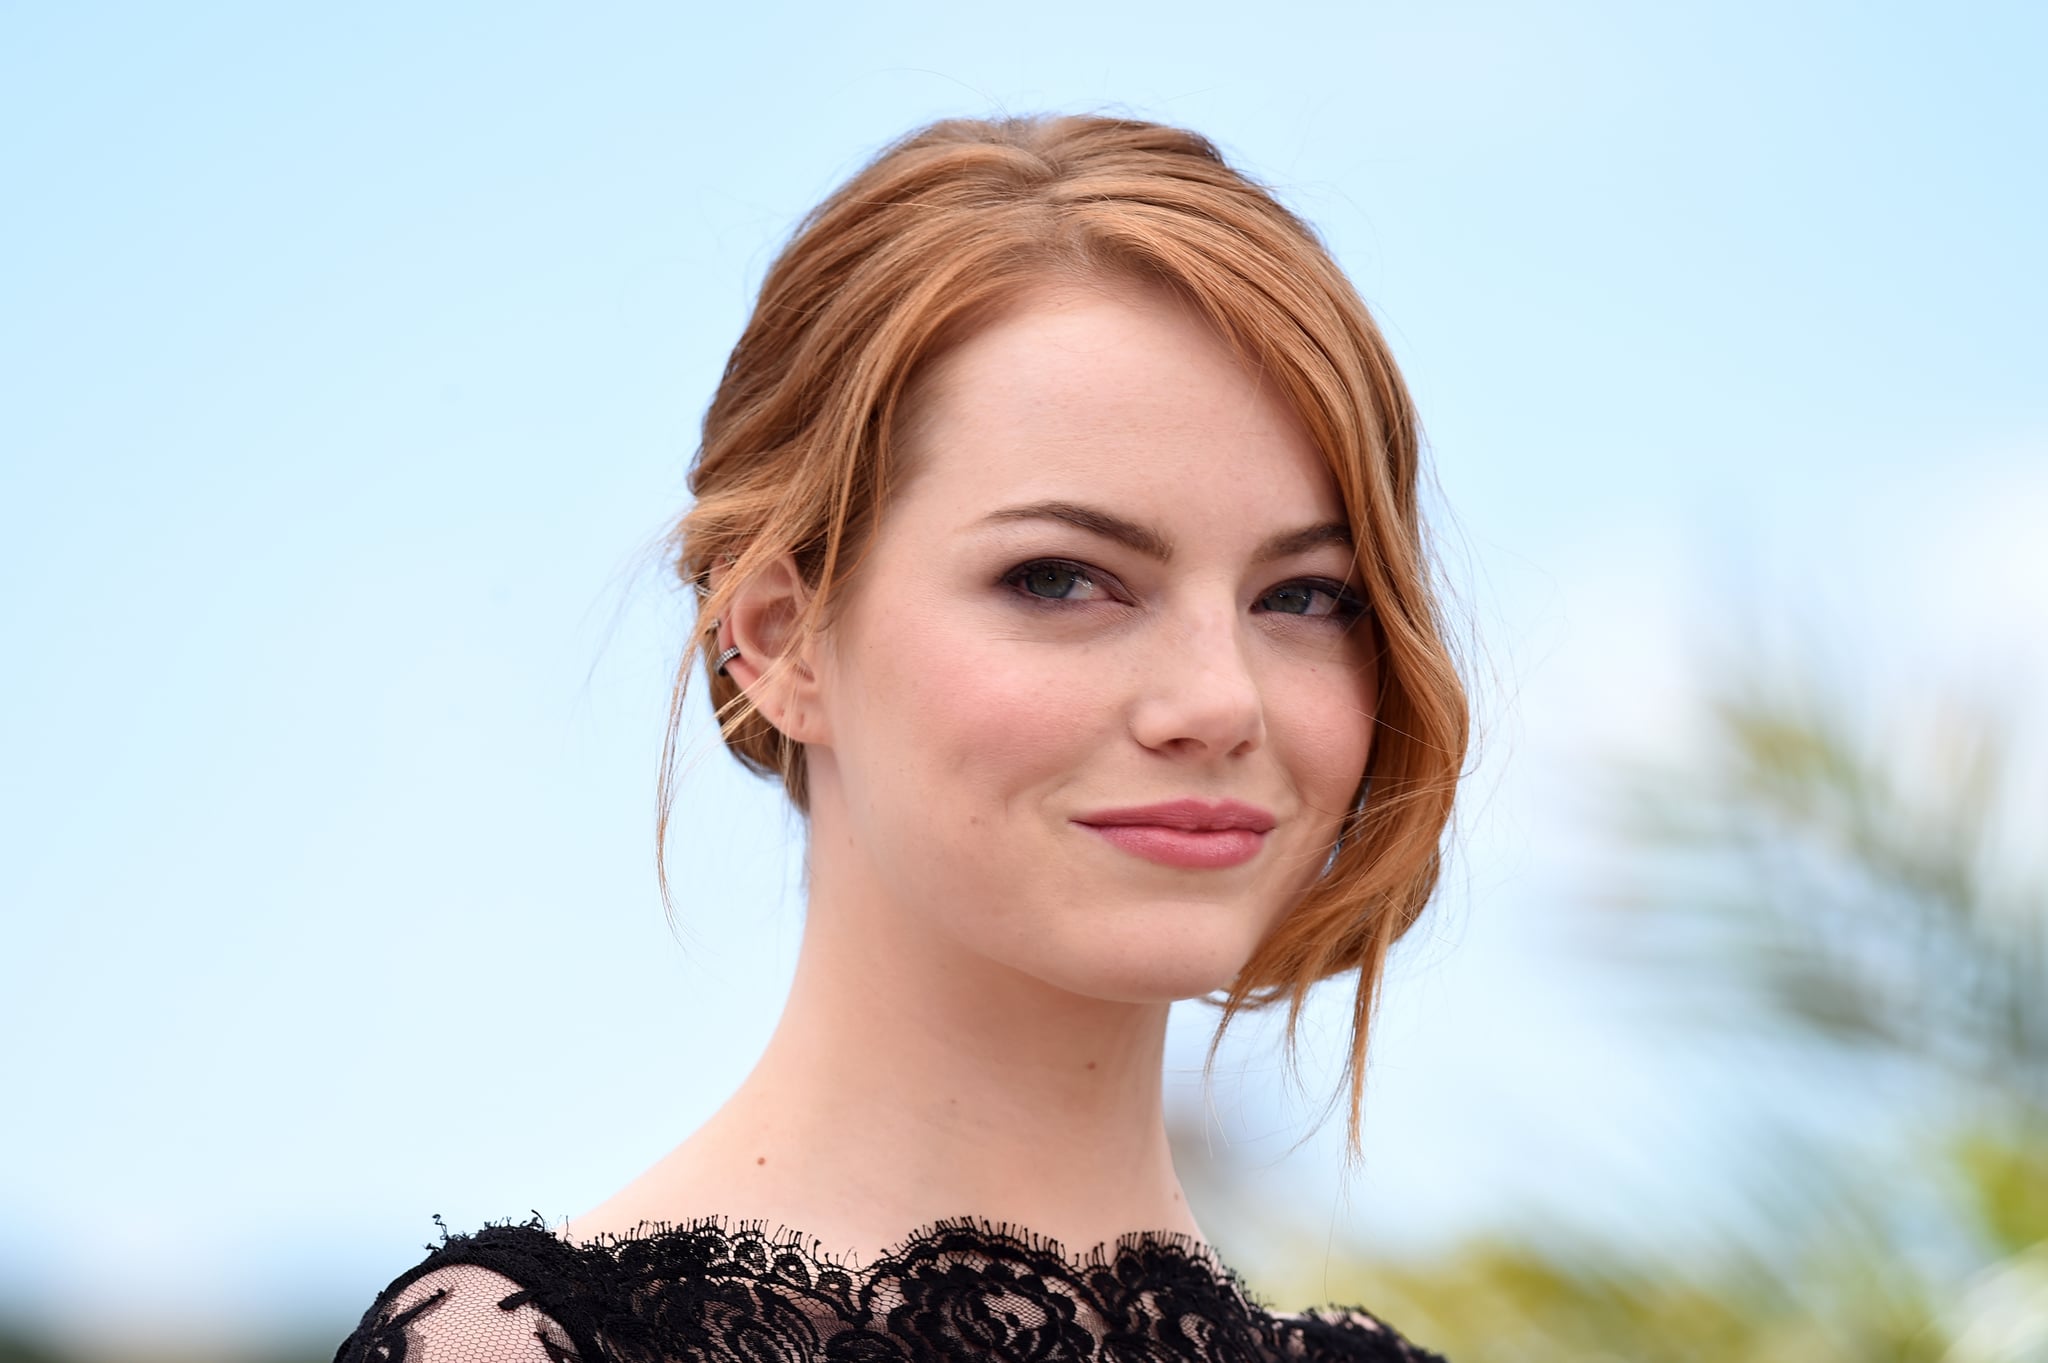 CANNES, FRANCE - MAY 15:  Actress Emma Stone attends a photocall for 